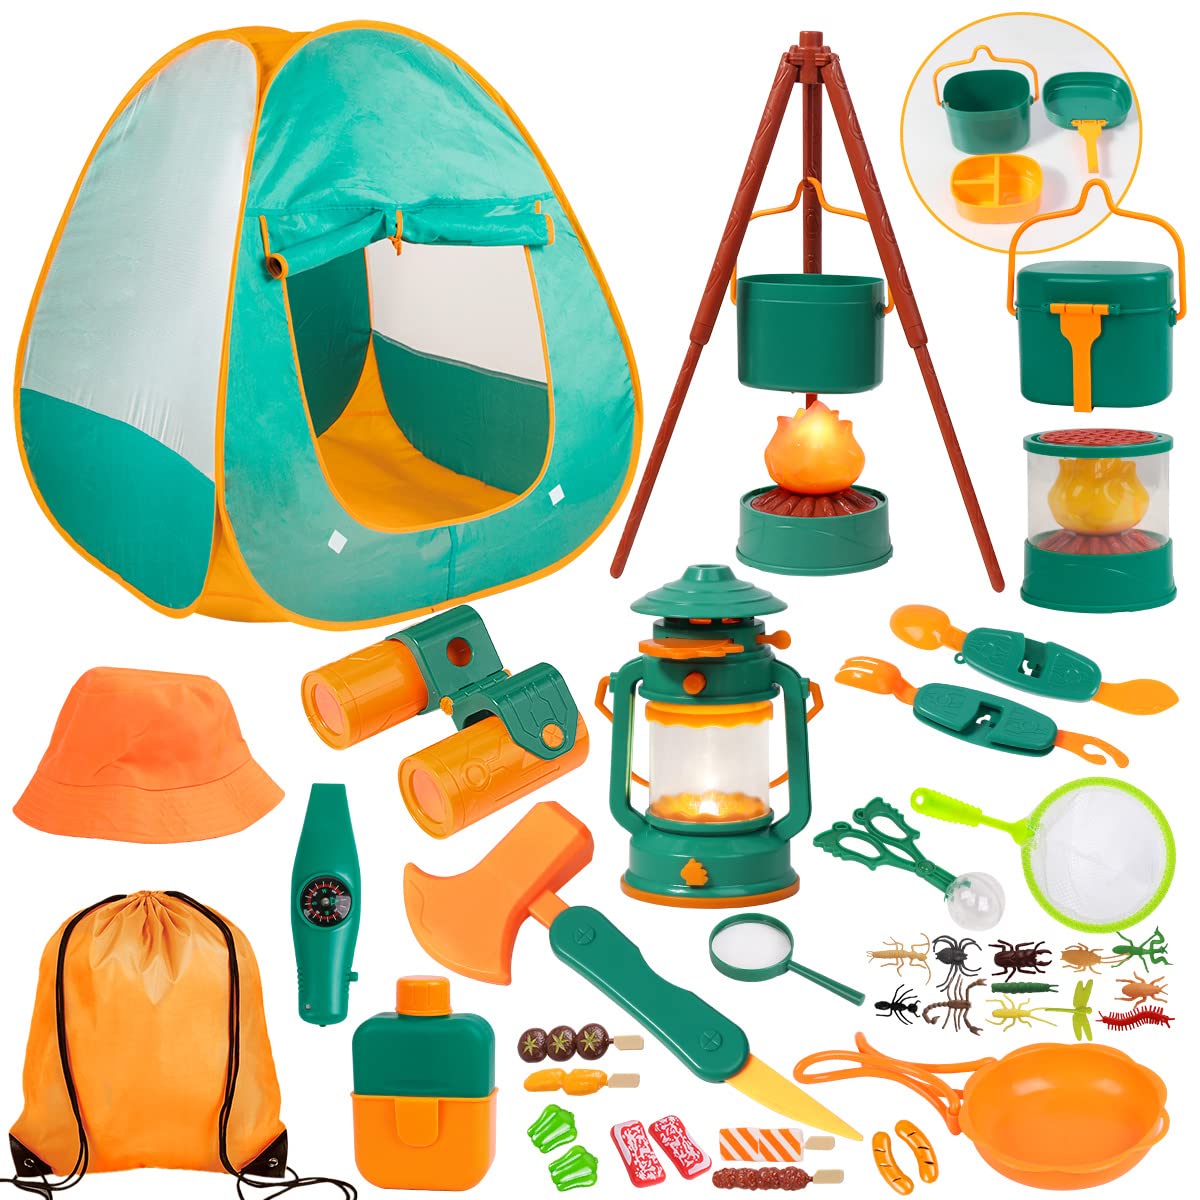 Meland Kids camping Set with Tent 30pcs - Outdoor campfire Toy Set for  Toddlers Kids Boys girls - Pretend Play camp gear